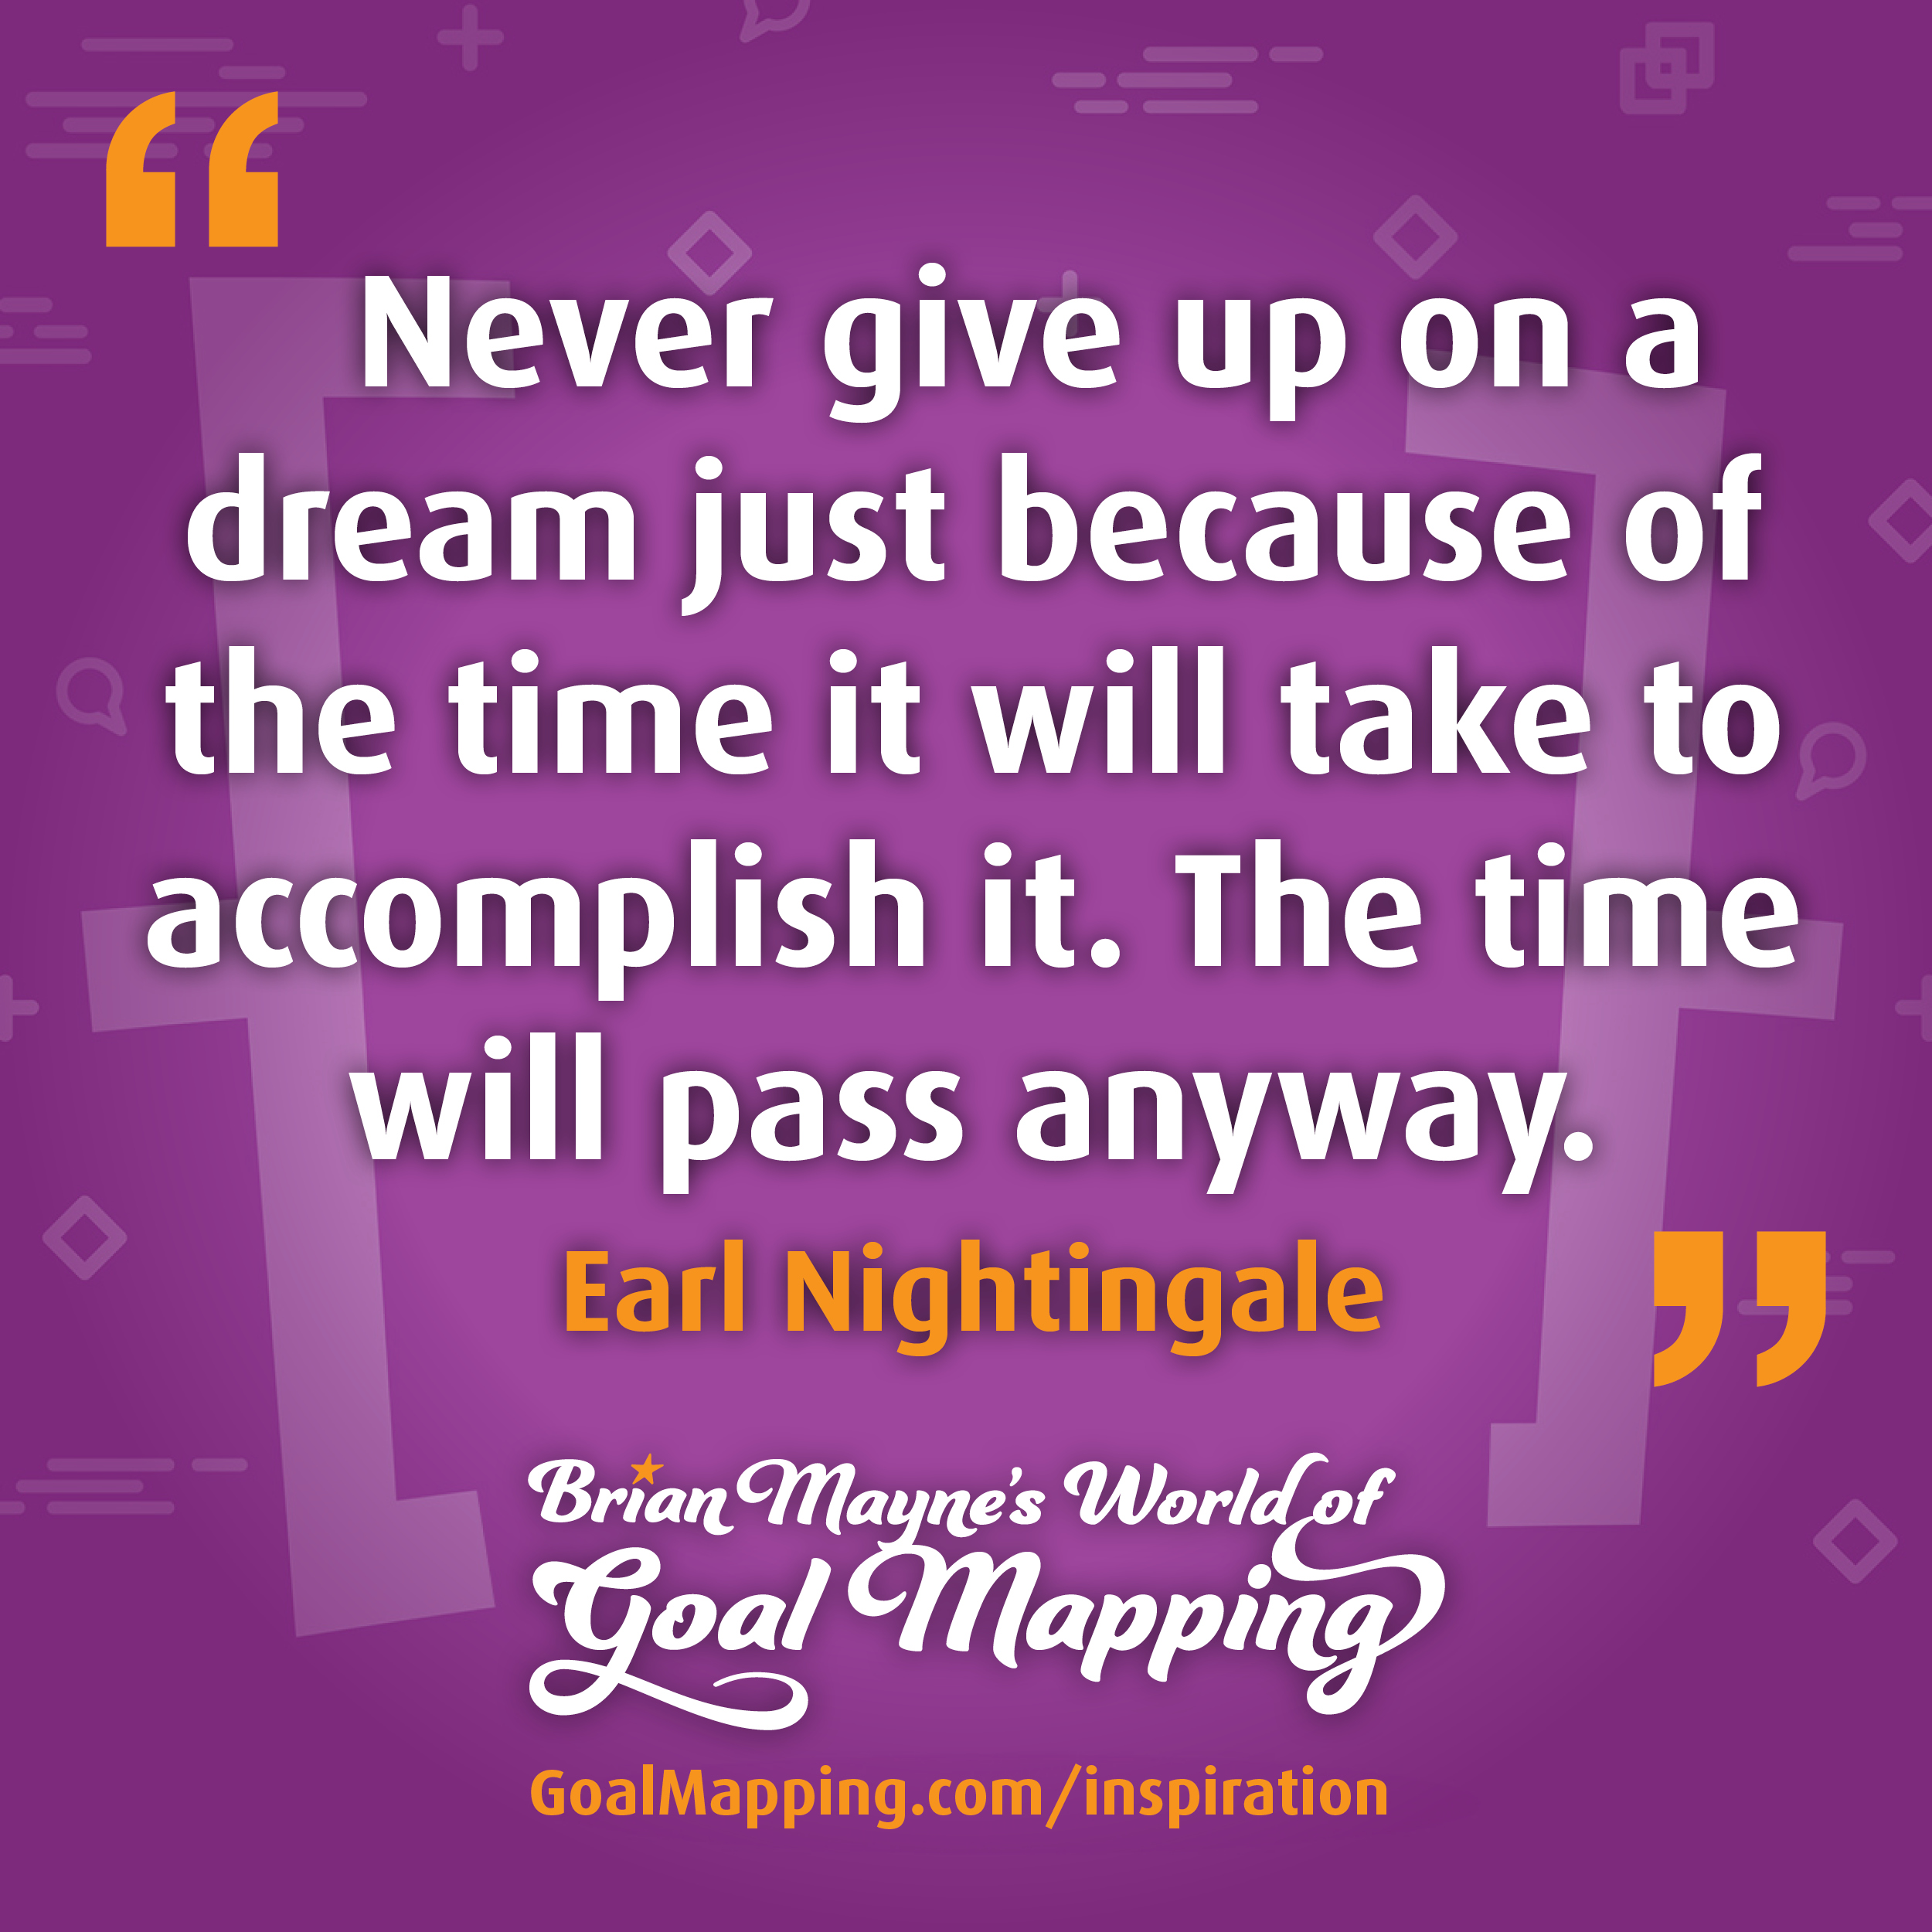 "Never give up on a dream just because of the time it will take to accomplish it. The time will pass anyway." Earl Nightingale